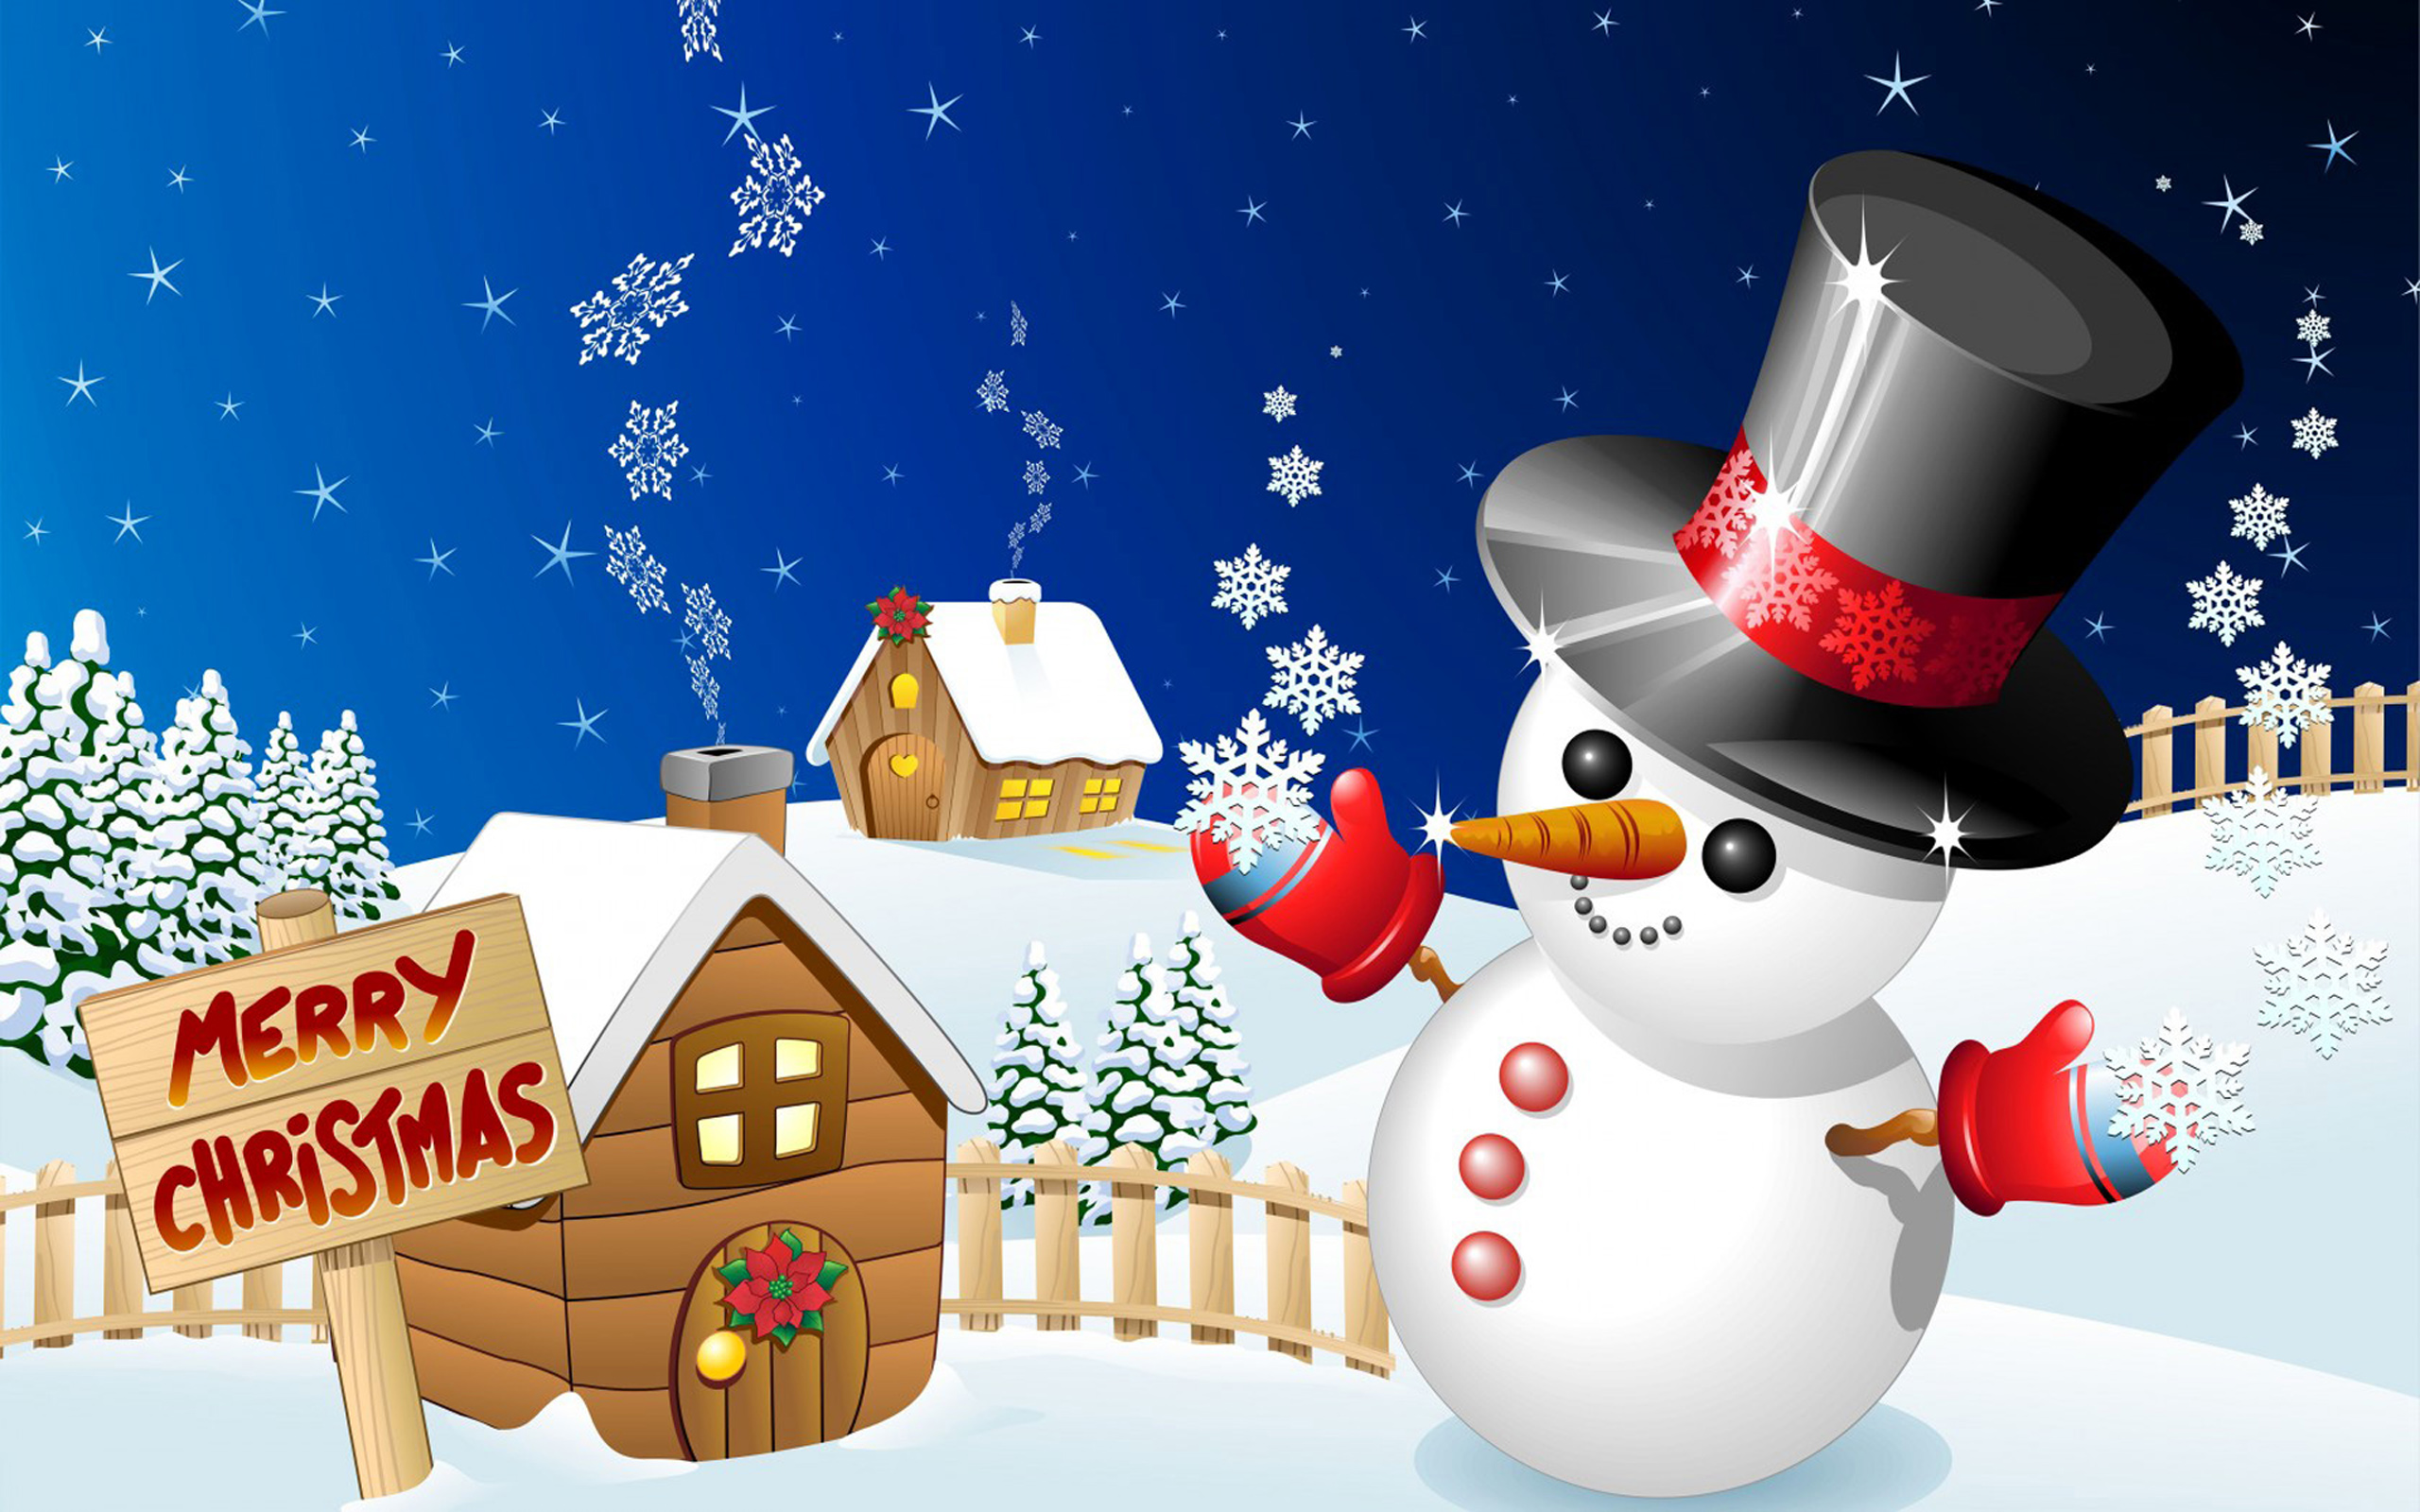 Merry Christmas Winter Snow Wood Houses With Snowman Desktop Hd Wallpaper  For Mobile Phones Tablet And Pc 2560x1600 : 